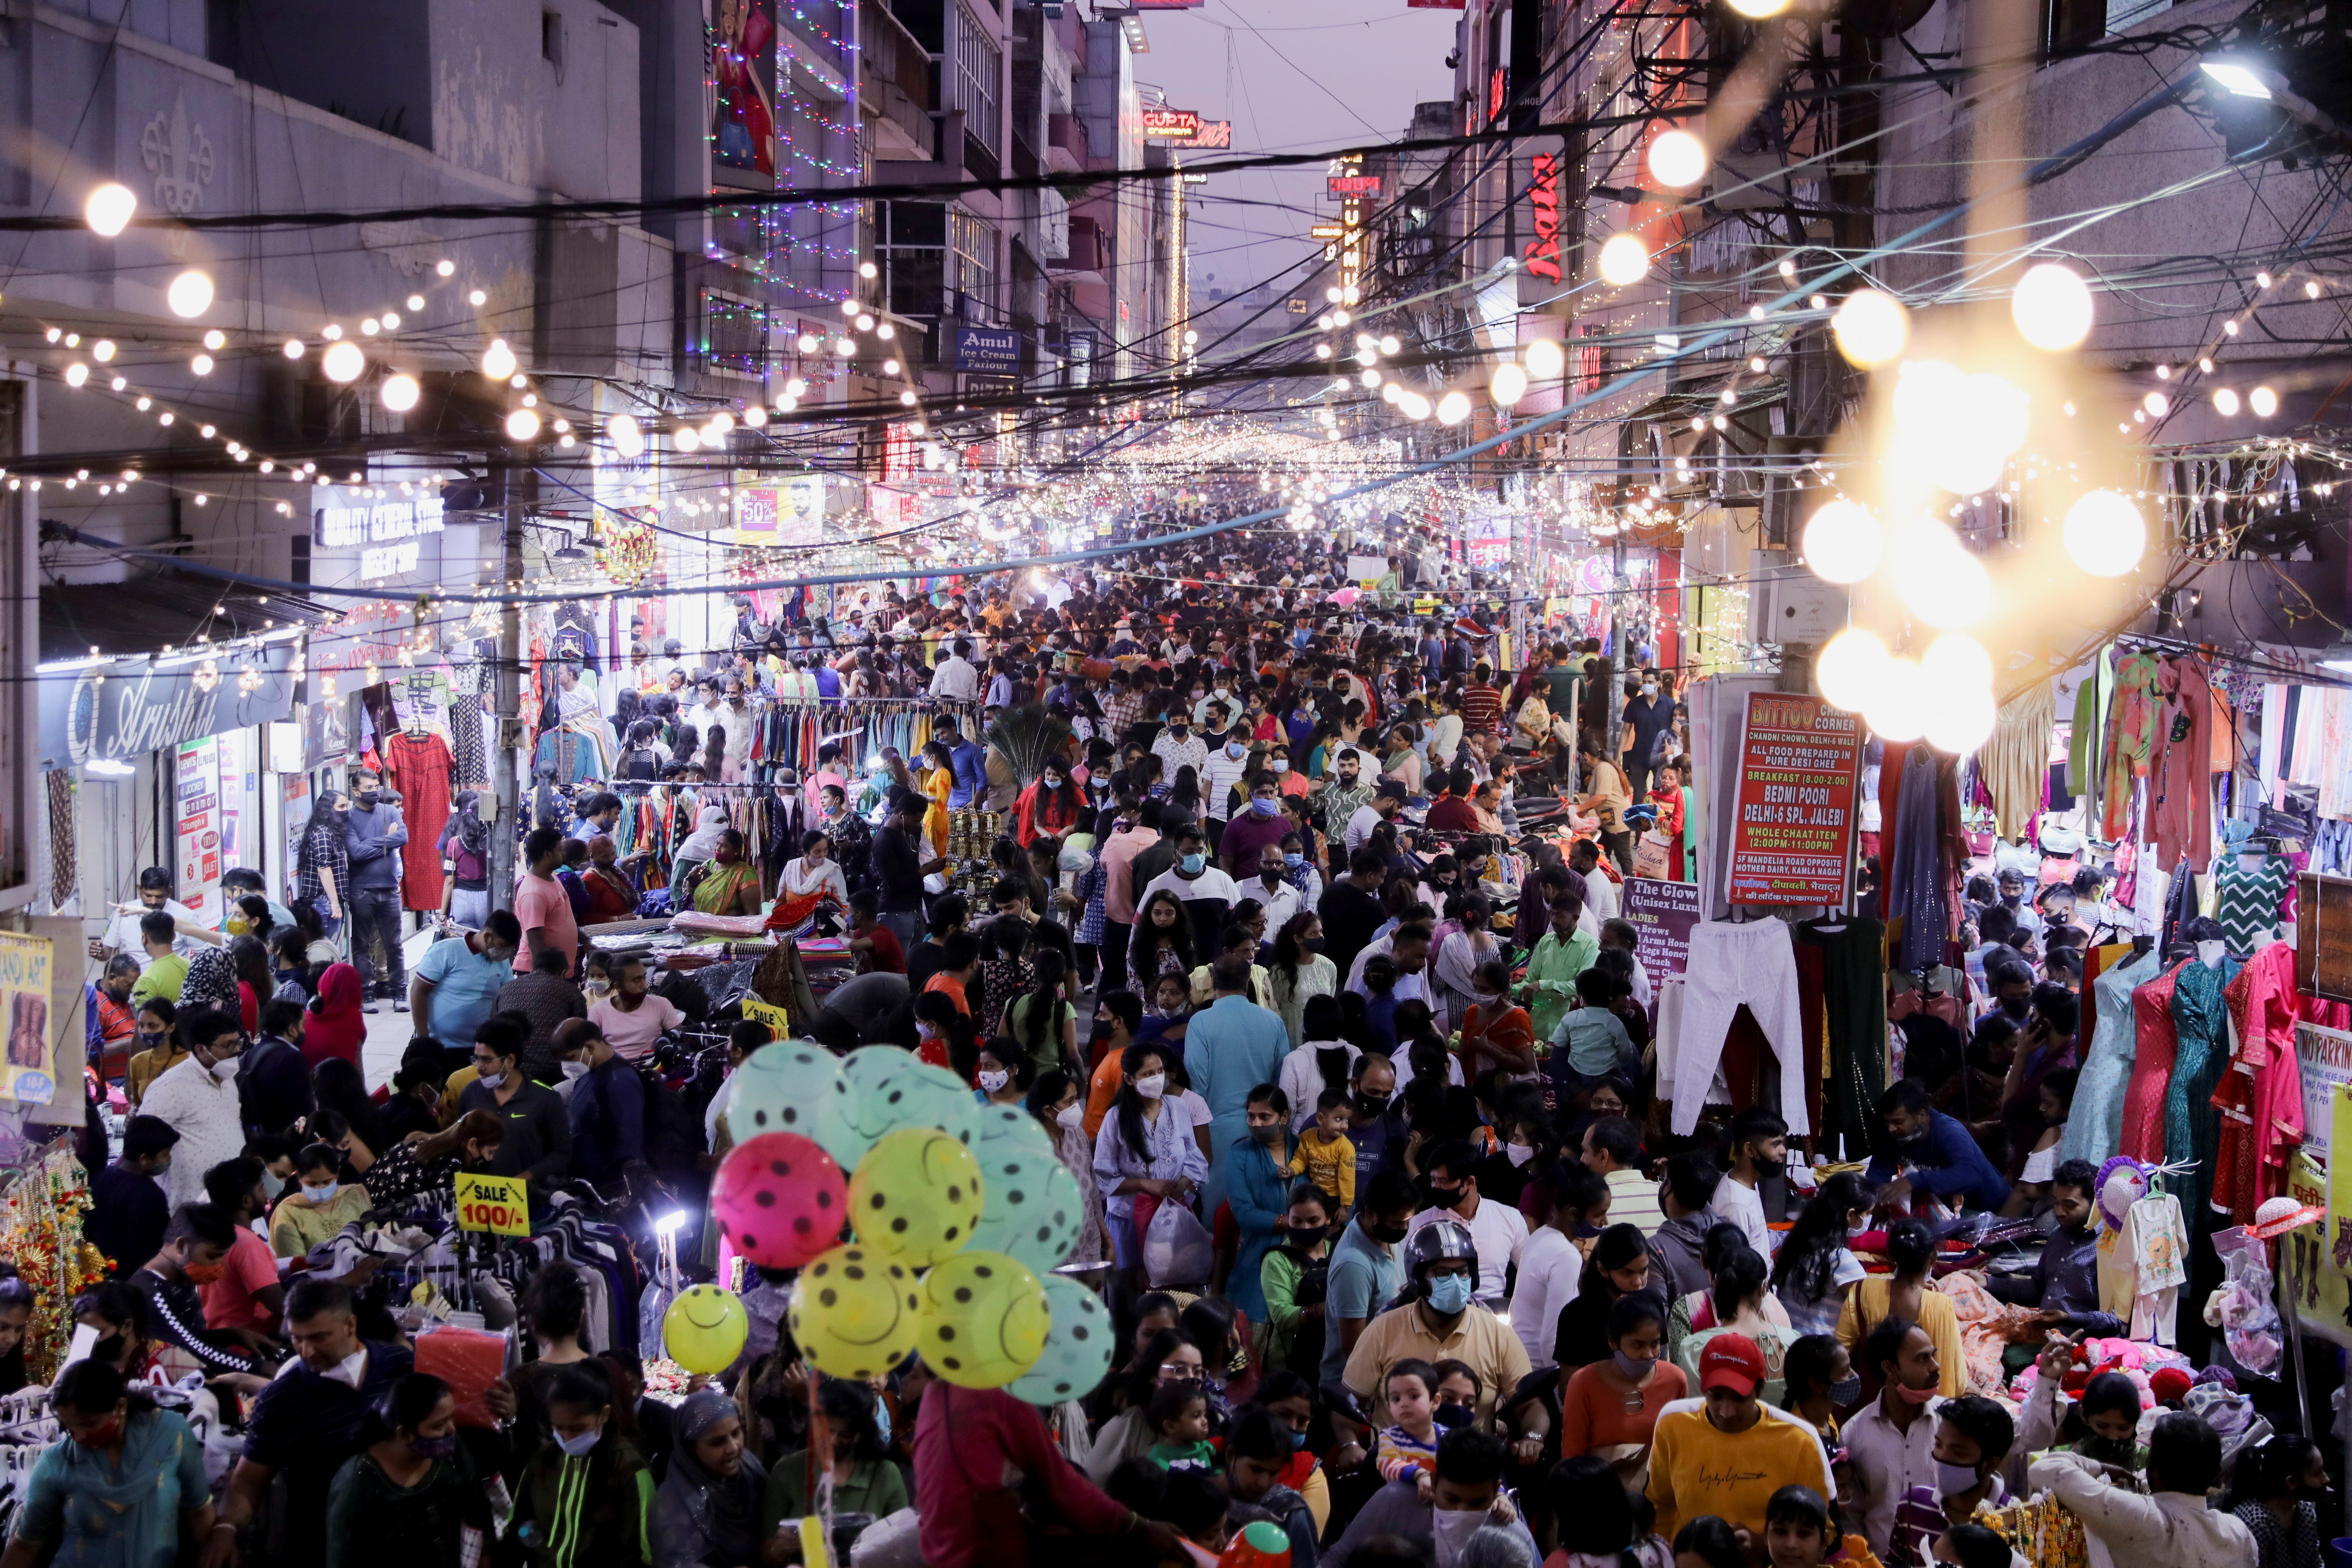 People shop at a crowded market ahead of Diwali in Delhi